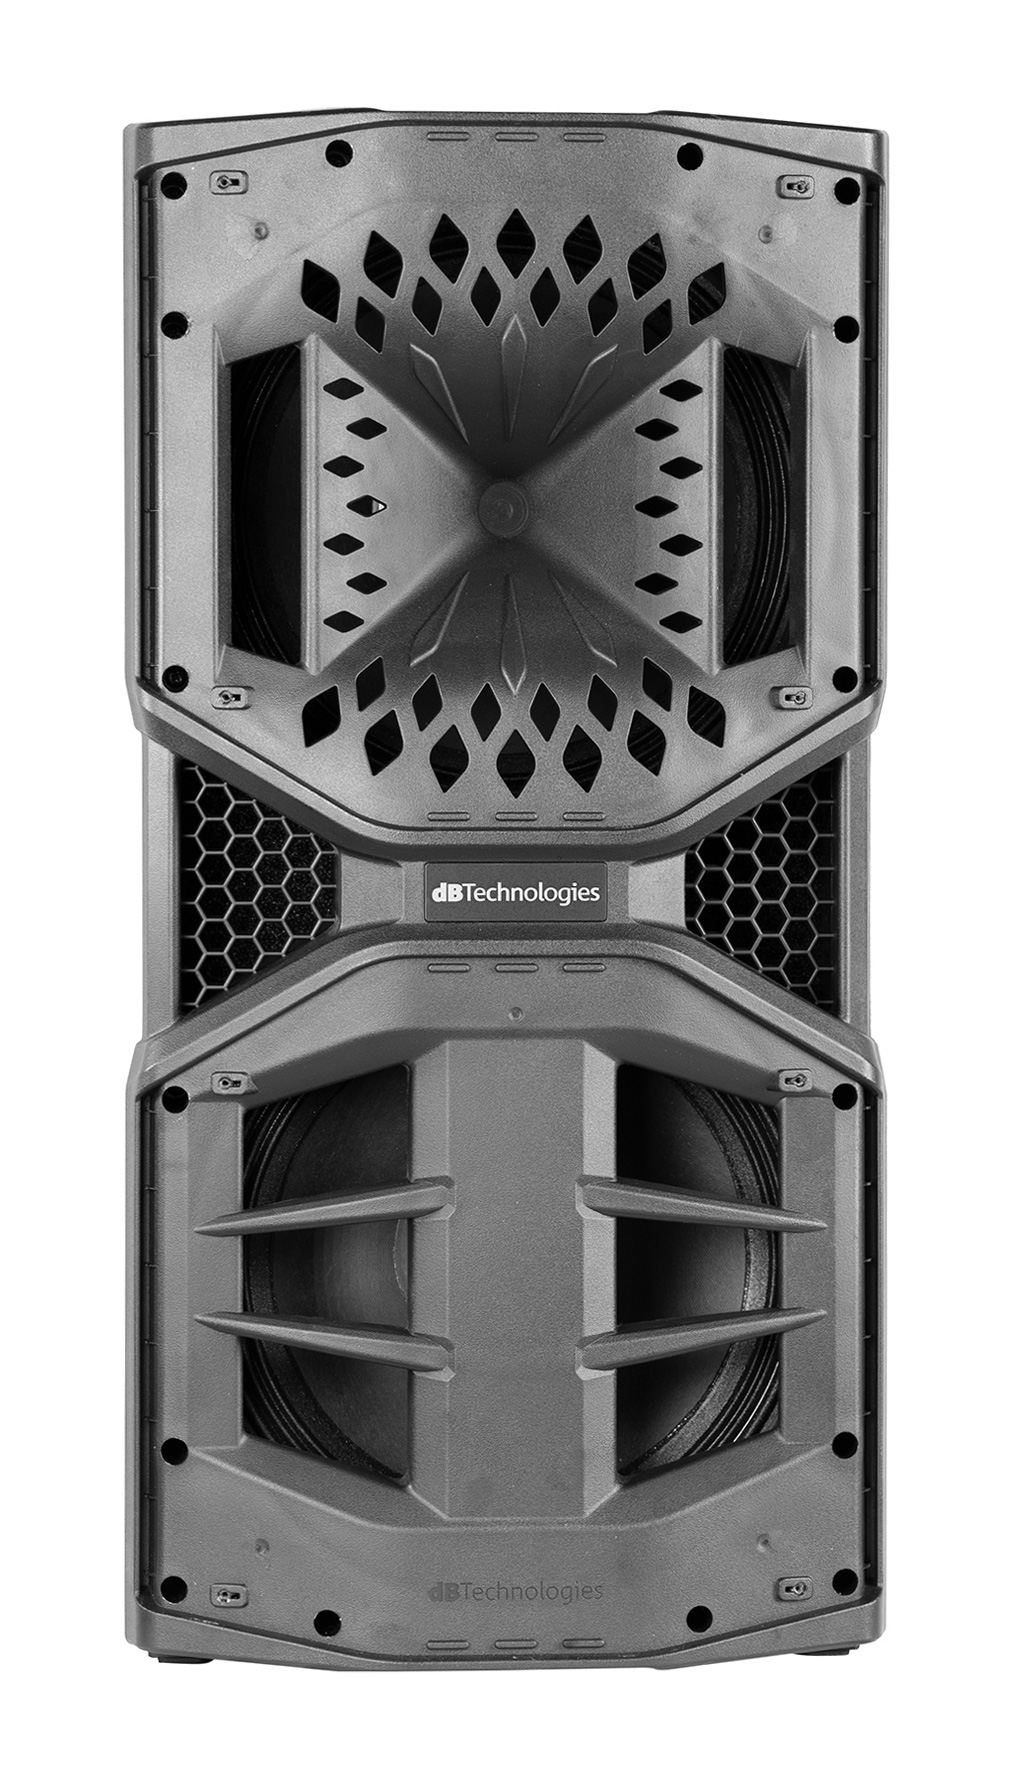 dBTechnologies Opera Reevo 212 front nogrille